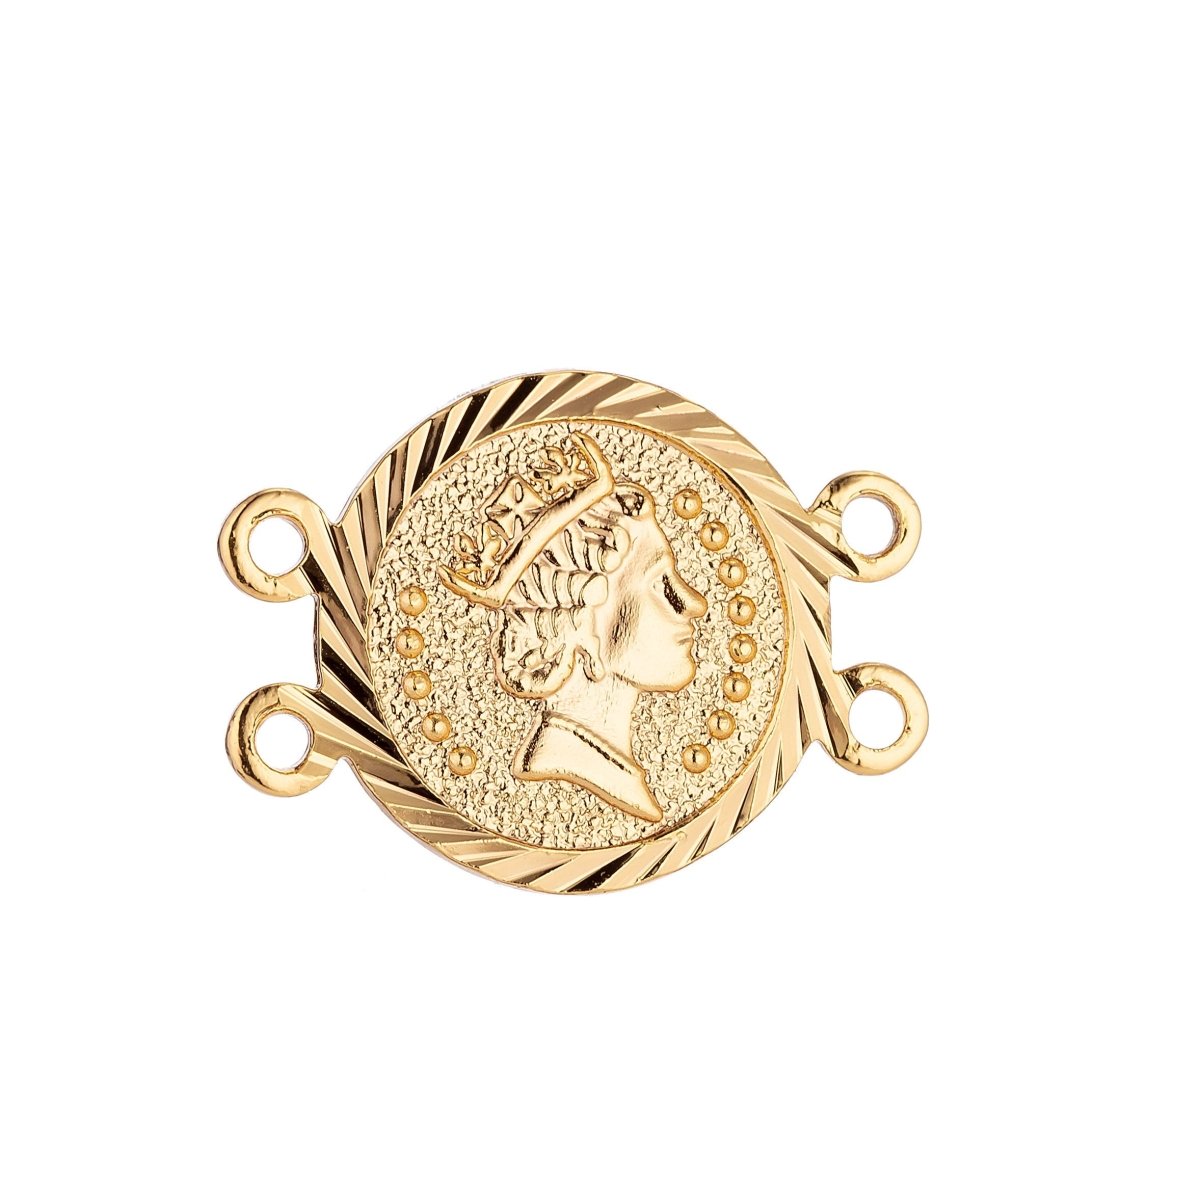 Gold Filled Coin Queen Elizabeth Medallion Bracelet Charm Connector Layer Necklace Connector Finding For Jewelry Making 19x14mm F-052 - DLUXCA